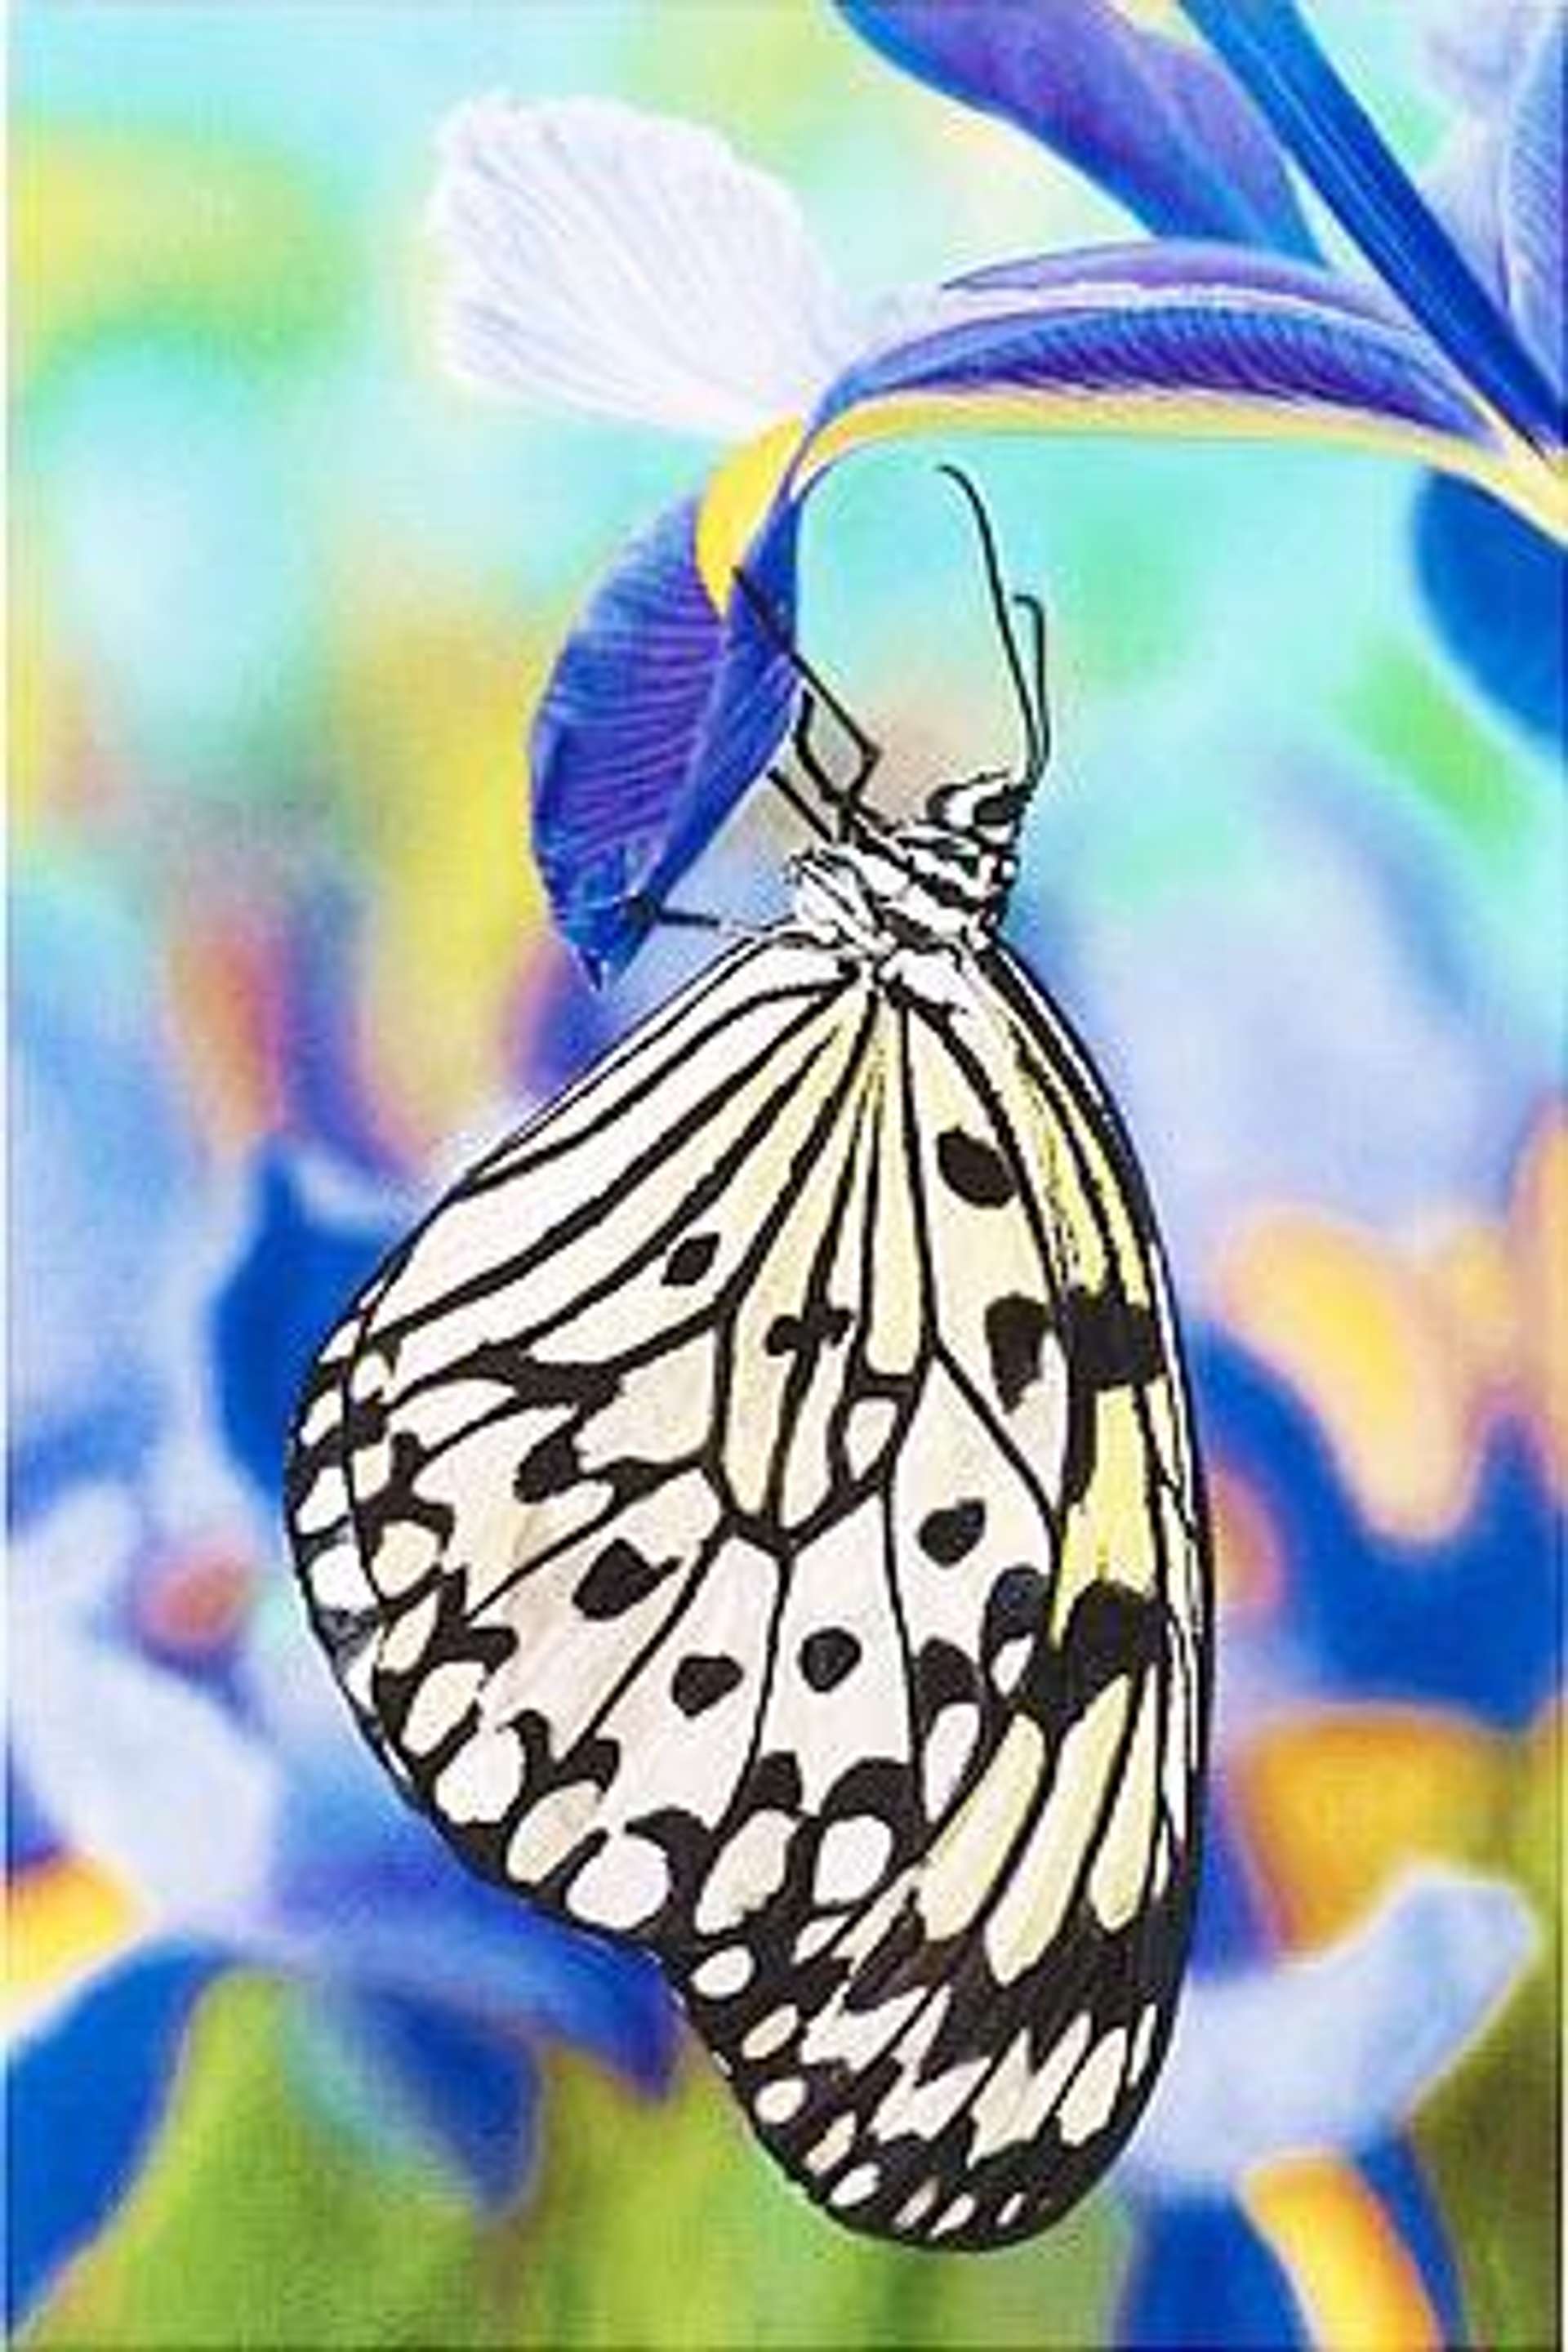 Damien Hirst: Paper Kite Butterfly On Spanish Iris - Signed Print